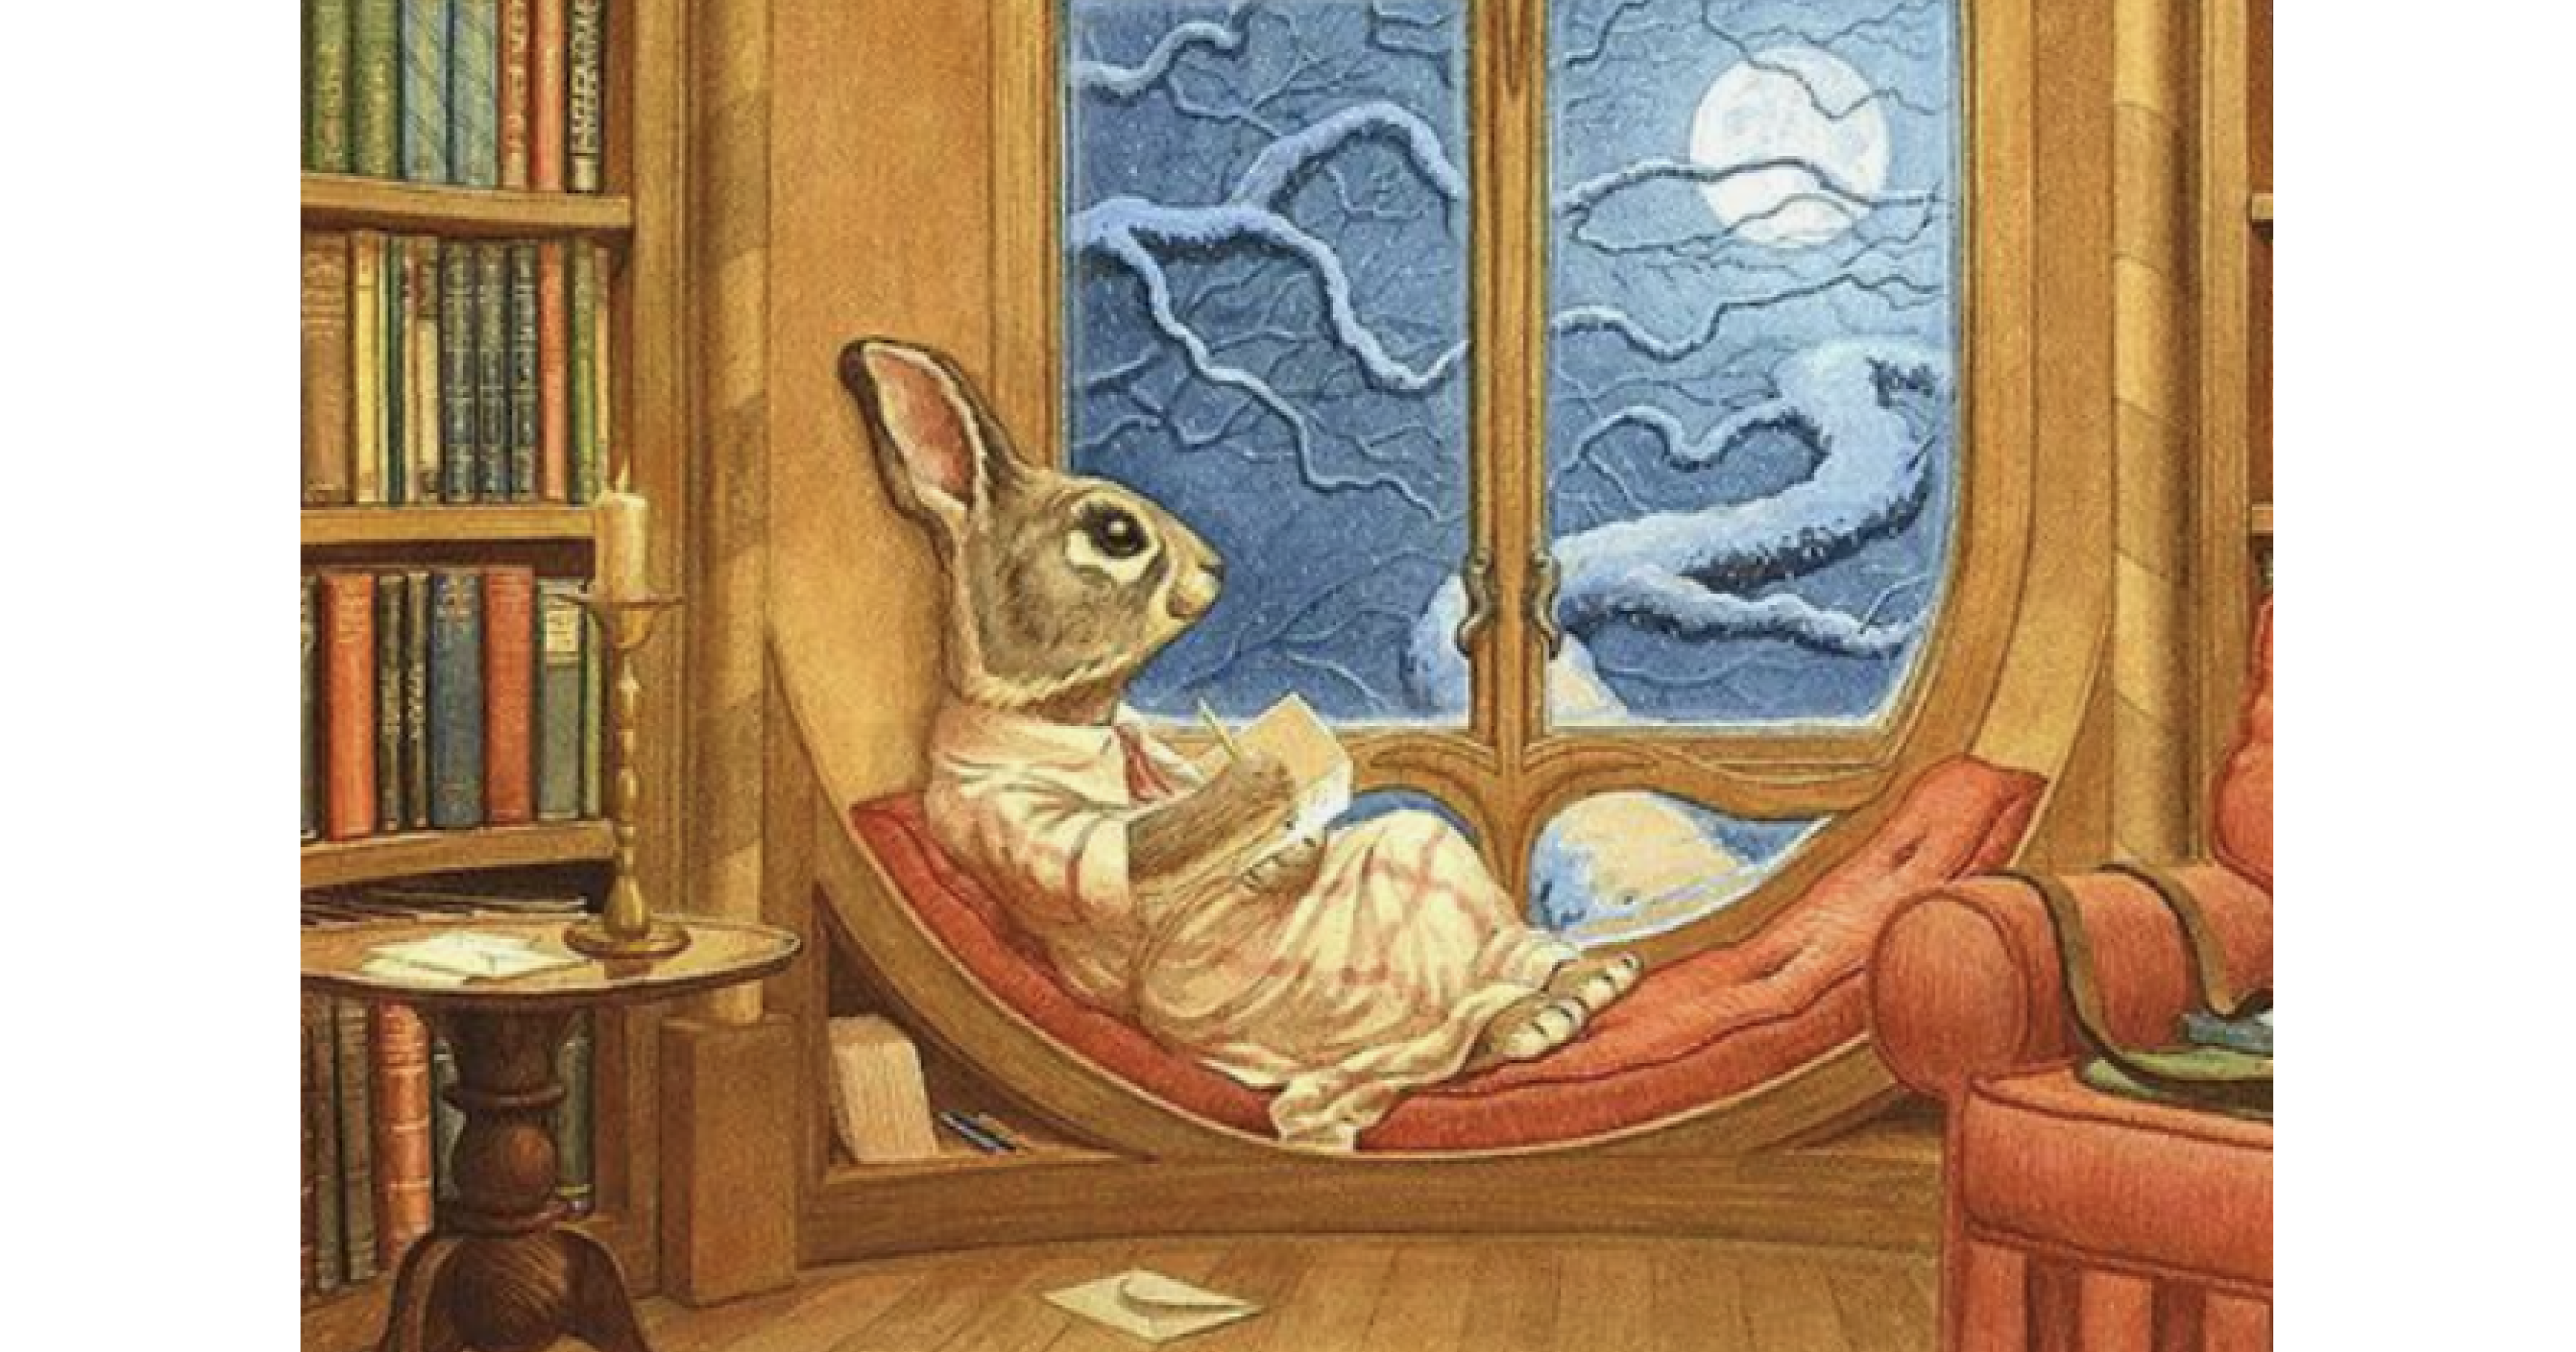 A rabbit reads a book by the window